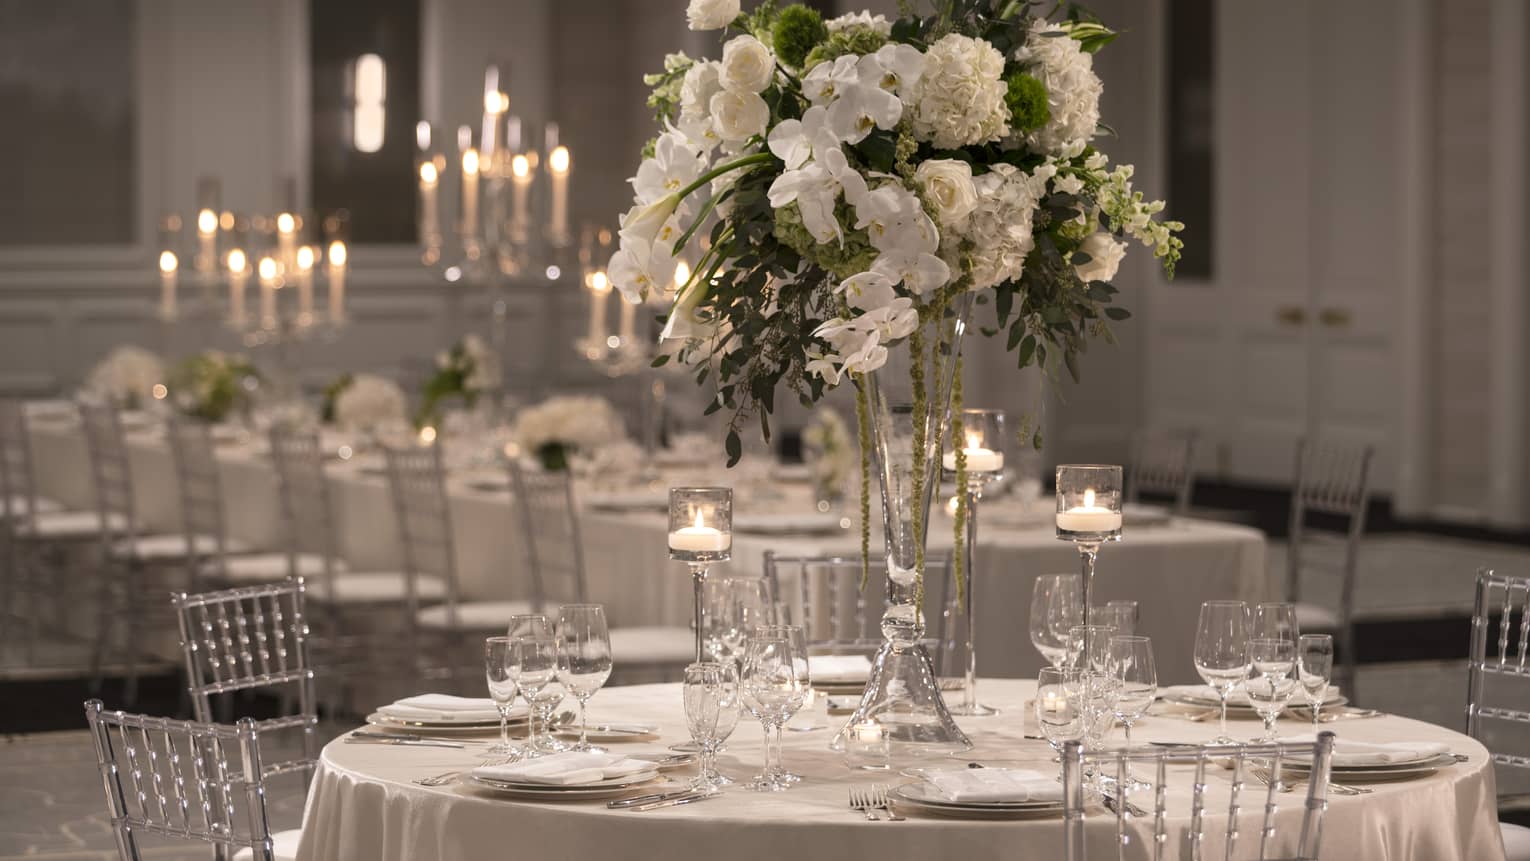 One formally set white rectangular table and candelabras, one round table and white floral centerpiece 